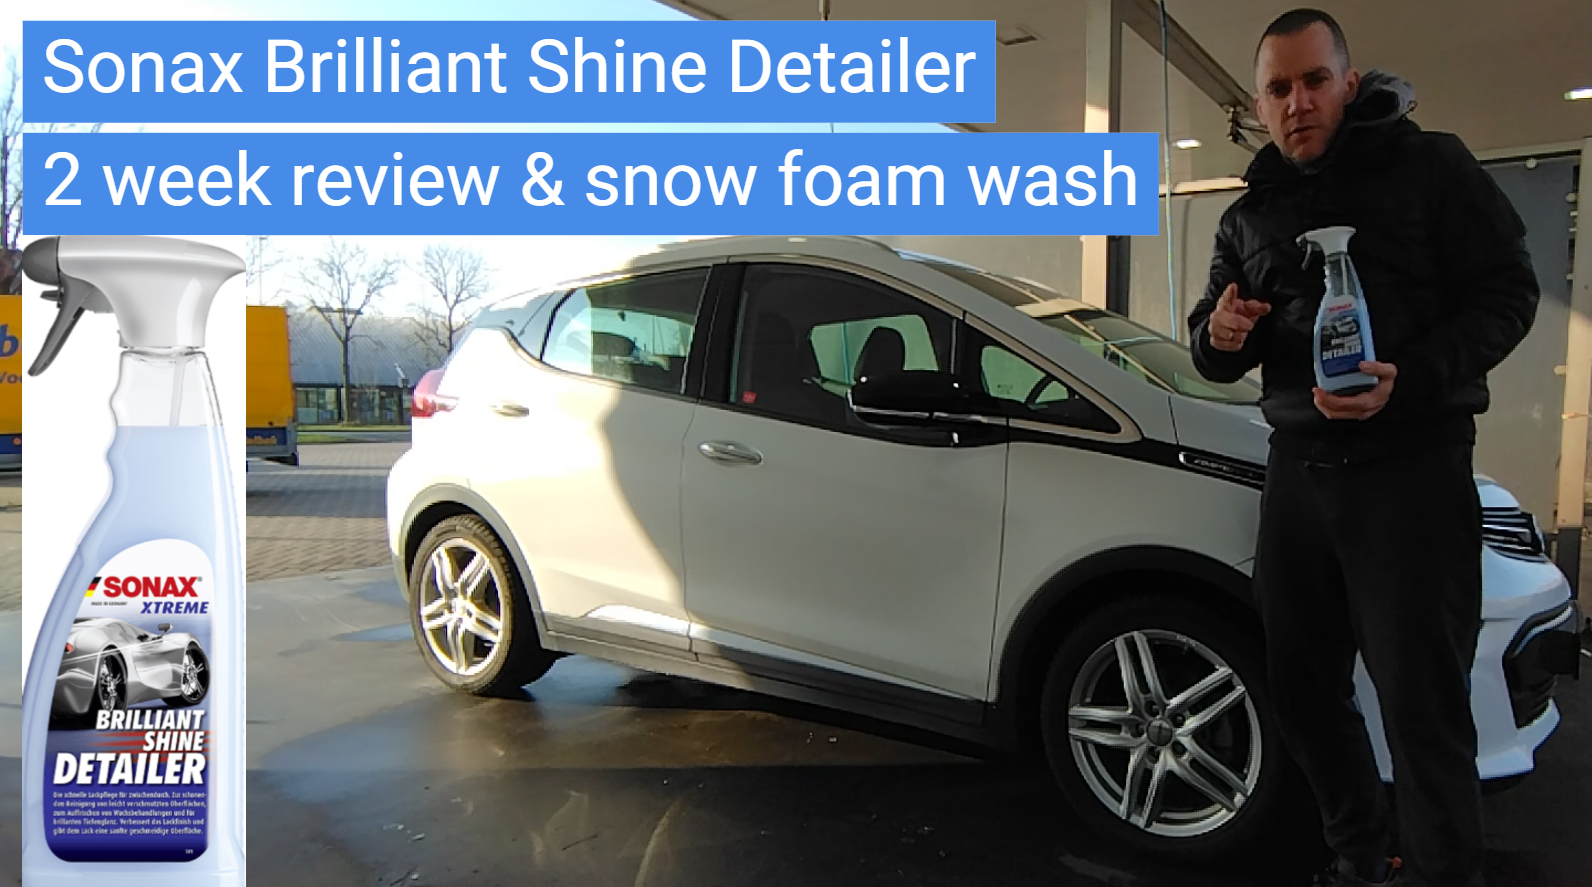 Sonax BSD 2 week review - winter car wash protection test